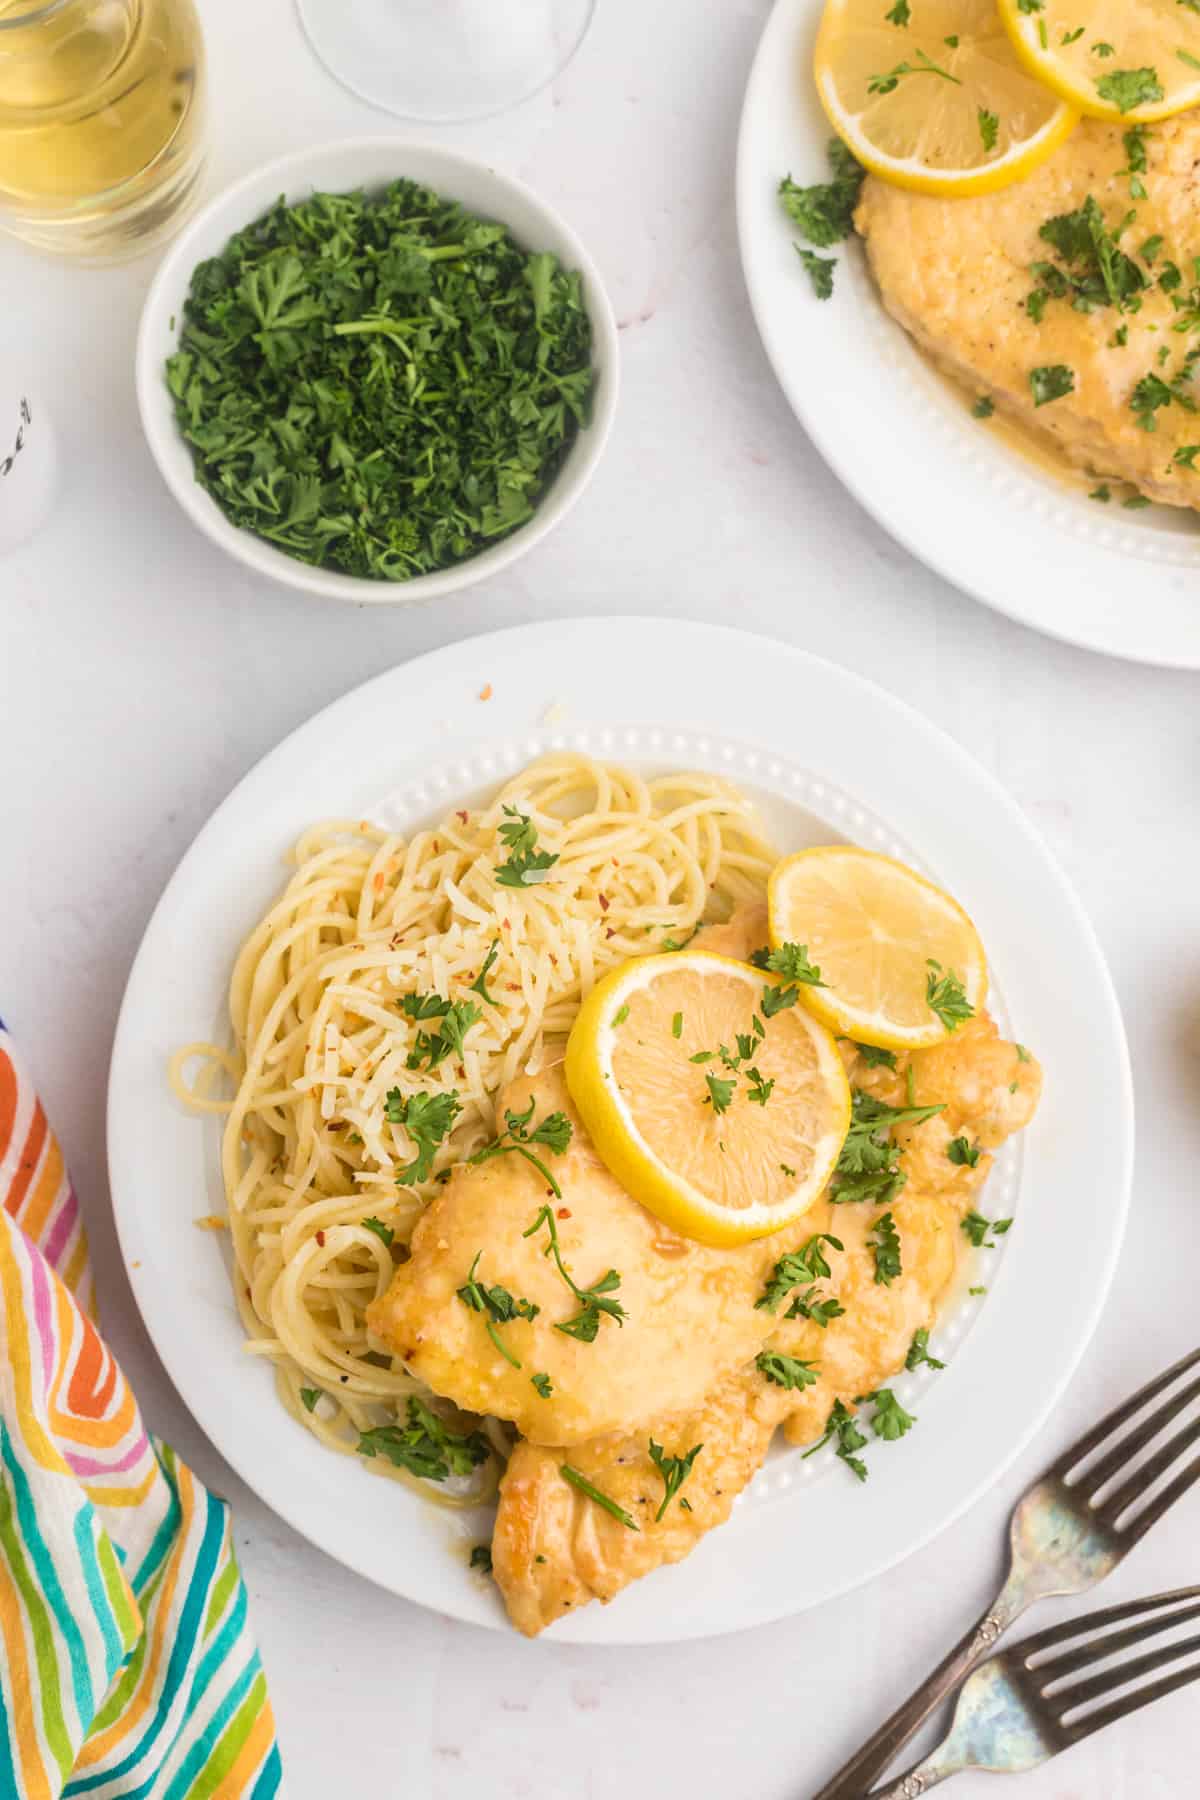 Chicken francese is served with pasta on a white plate.